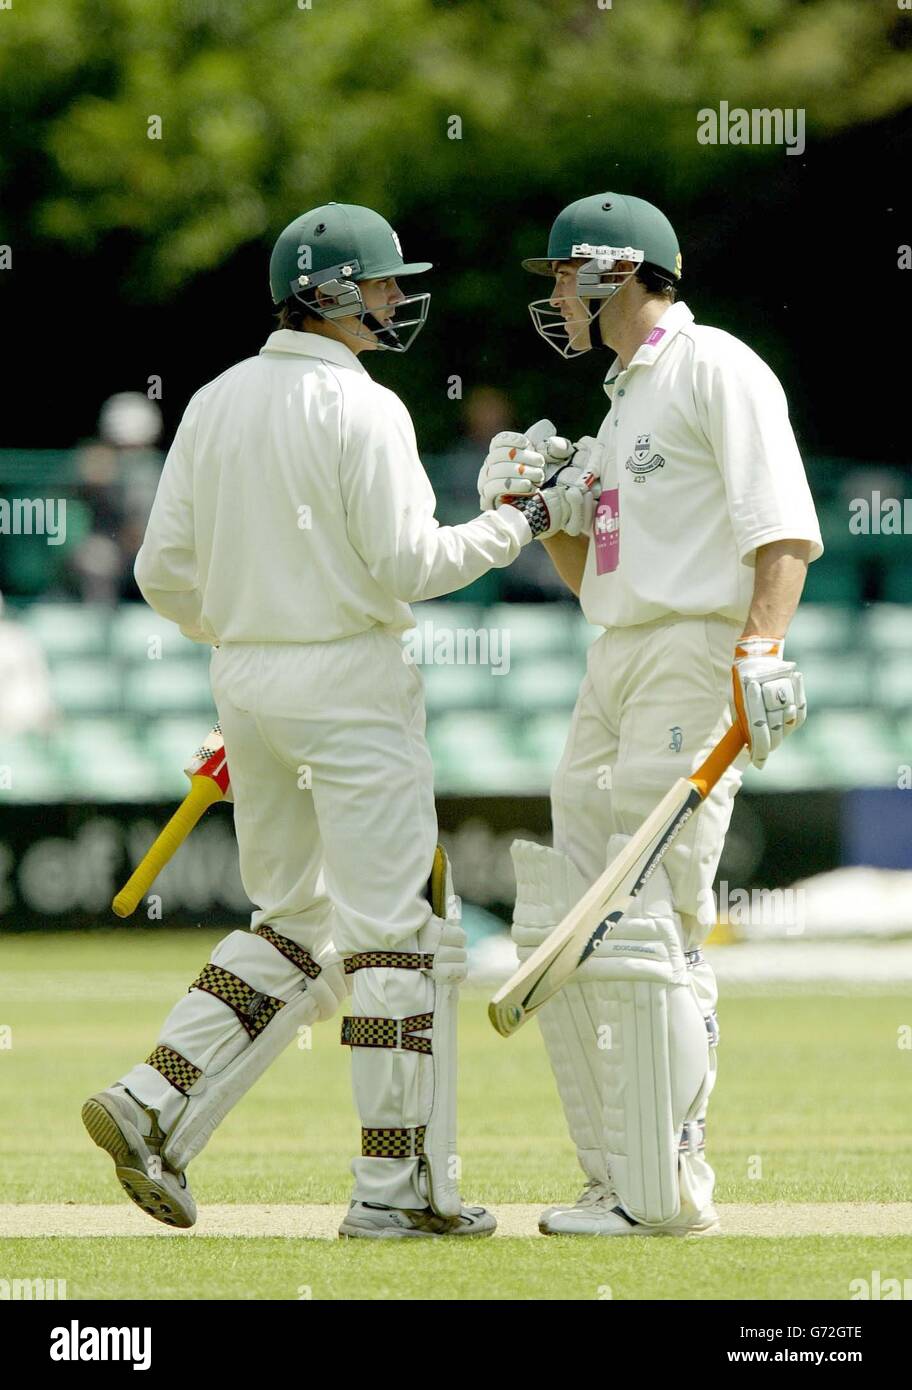 Stephen Peters (left) is congratulated by Stephen Moore (right) on reaching his century having already reached his own century earlier this morning as Worcestershire's opening partnership passes 200 against Surrey in the Frizzell County Championship match at New Road, Worcester. Stock Photo